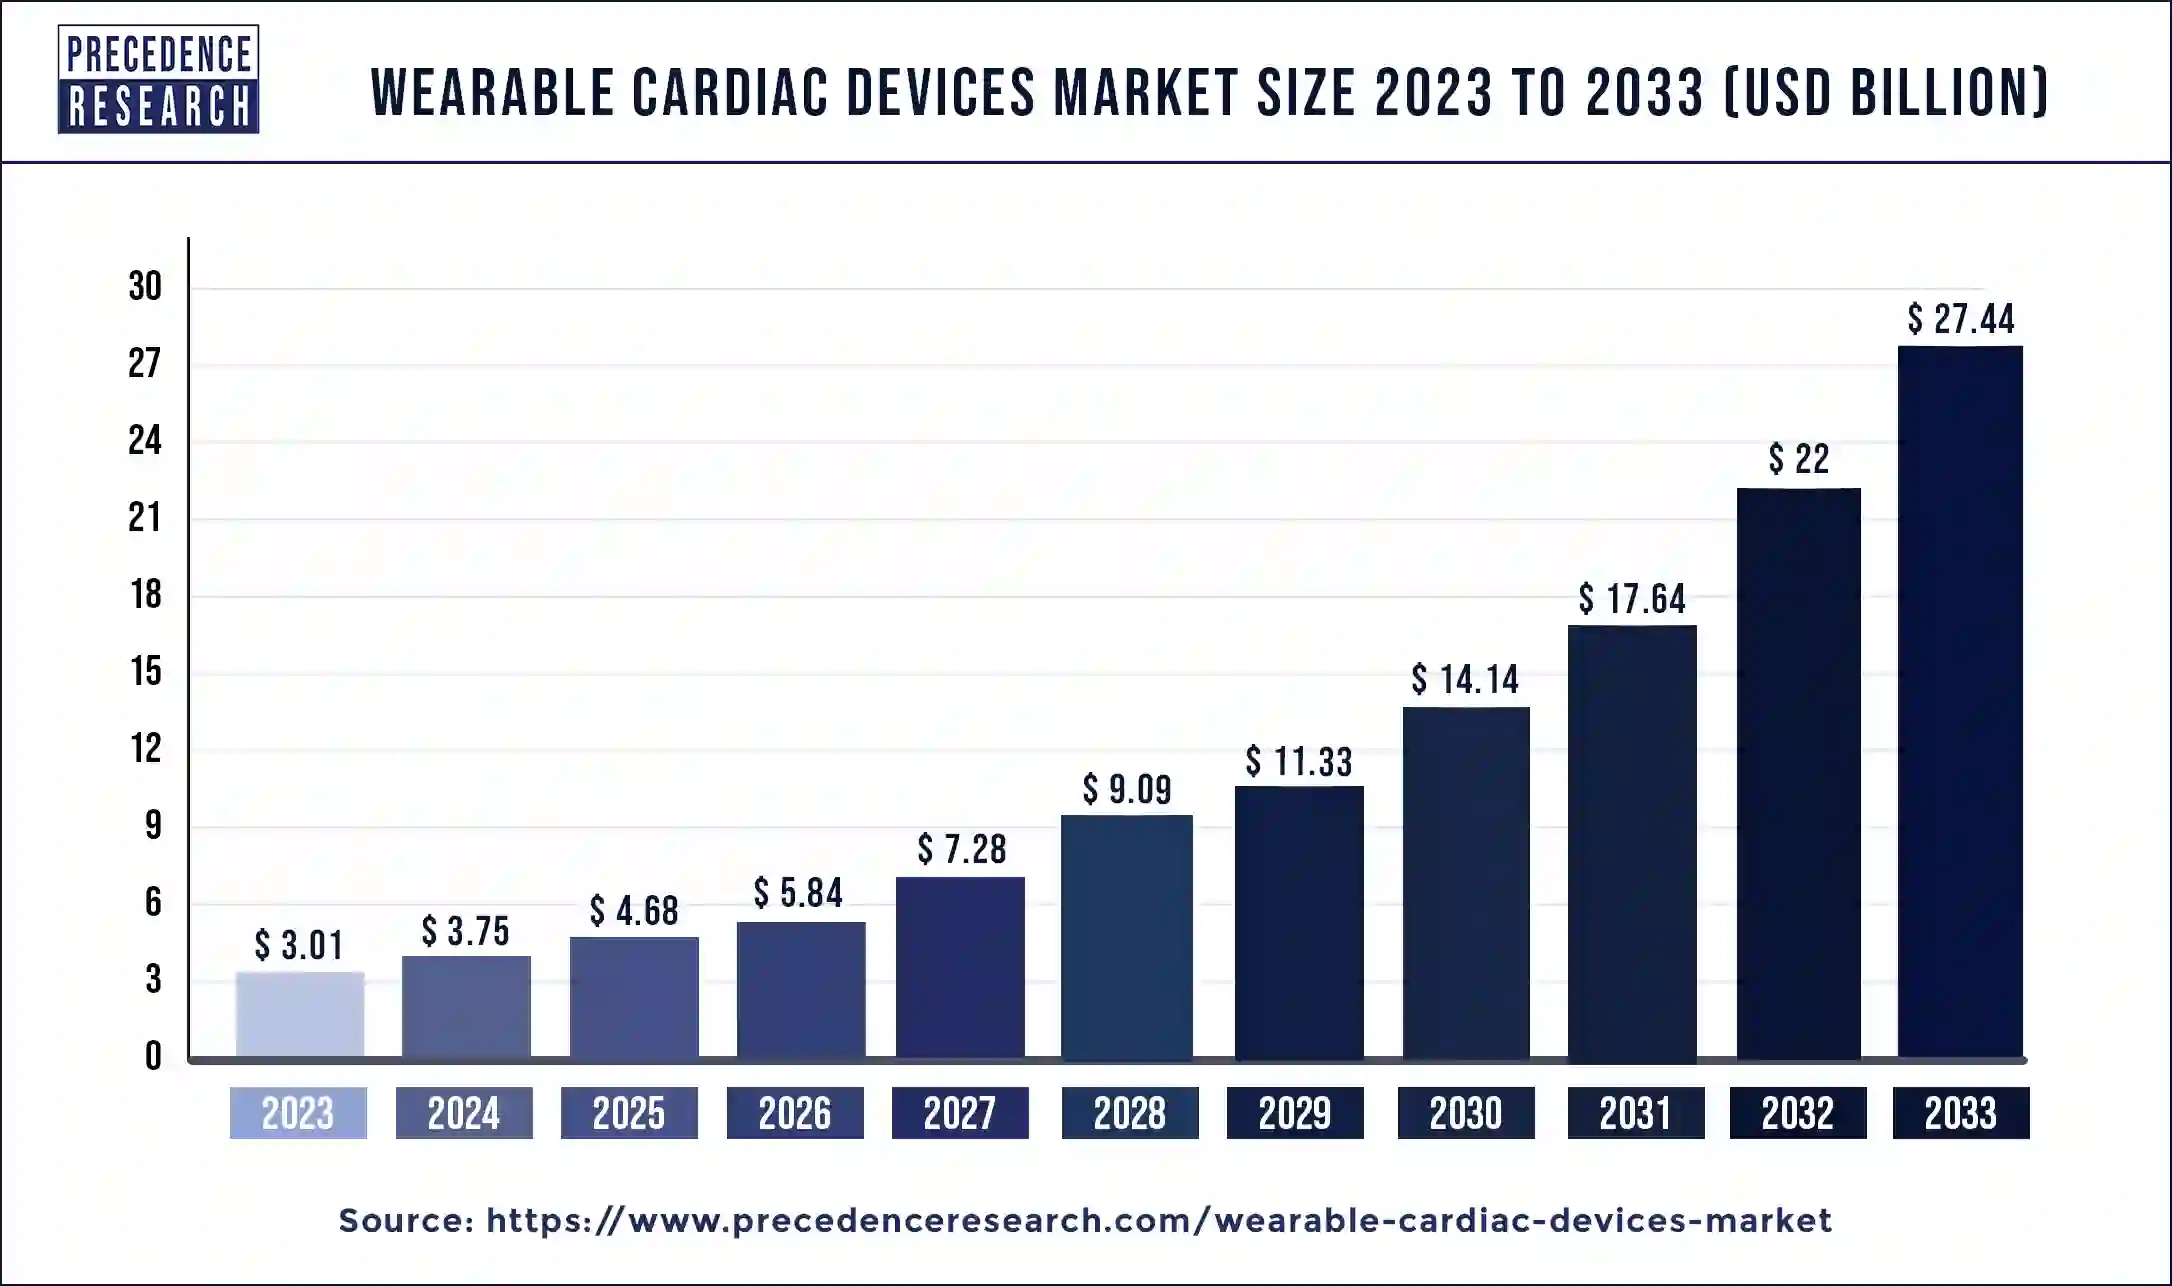 Wearable Cardiac Devices Market Size 2024 to 2033